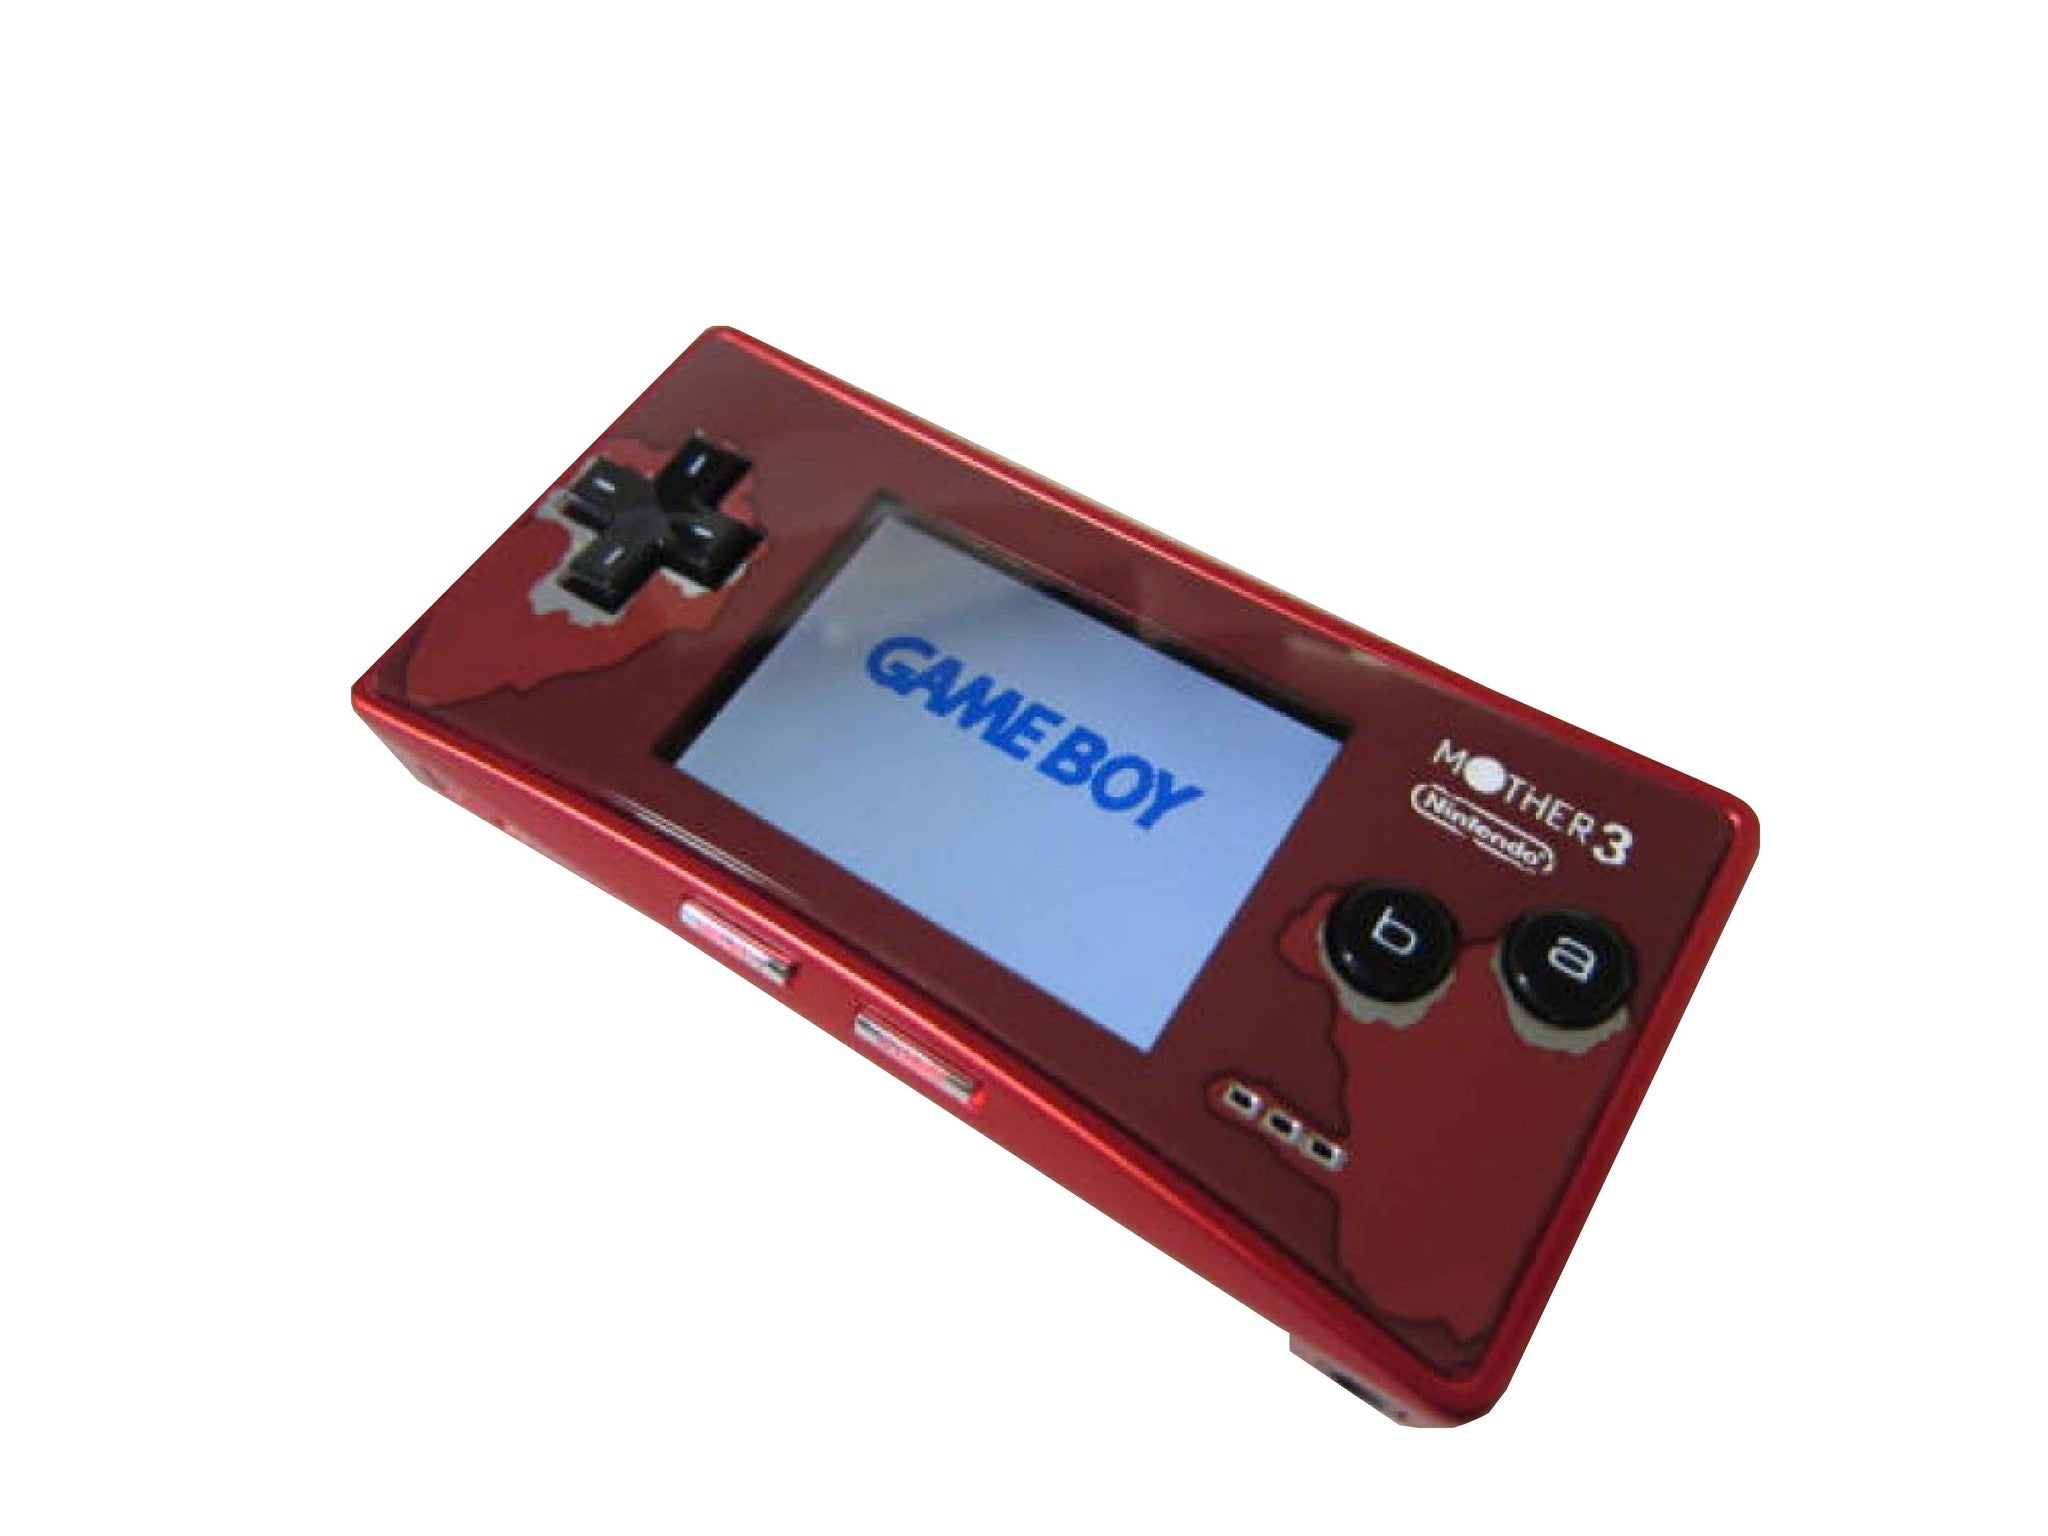 Nintendo Game Boy Micro - Mother 3 LIMITED EDITION